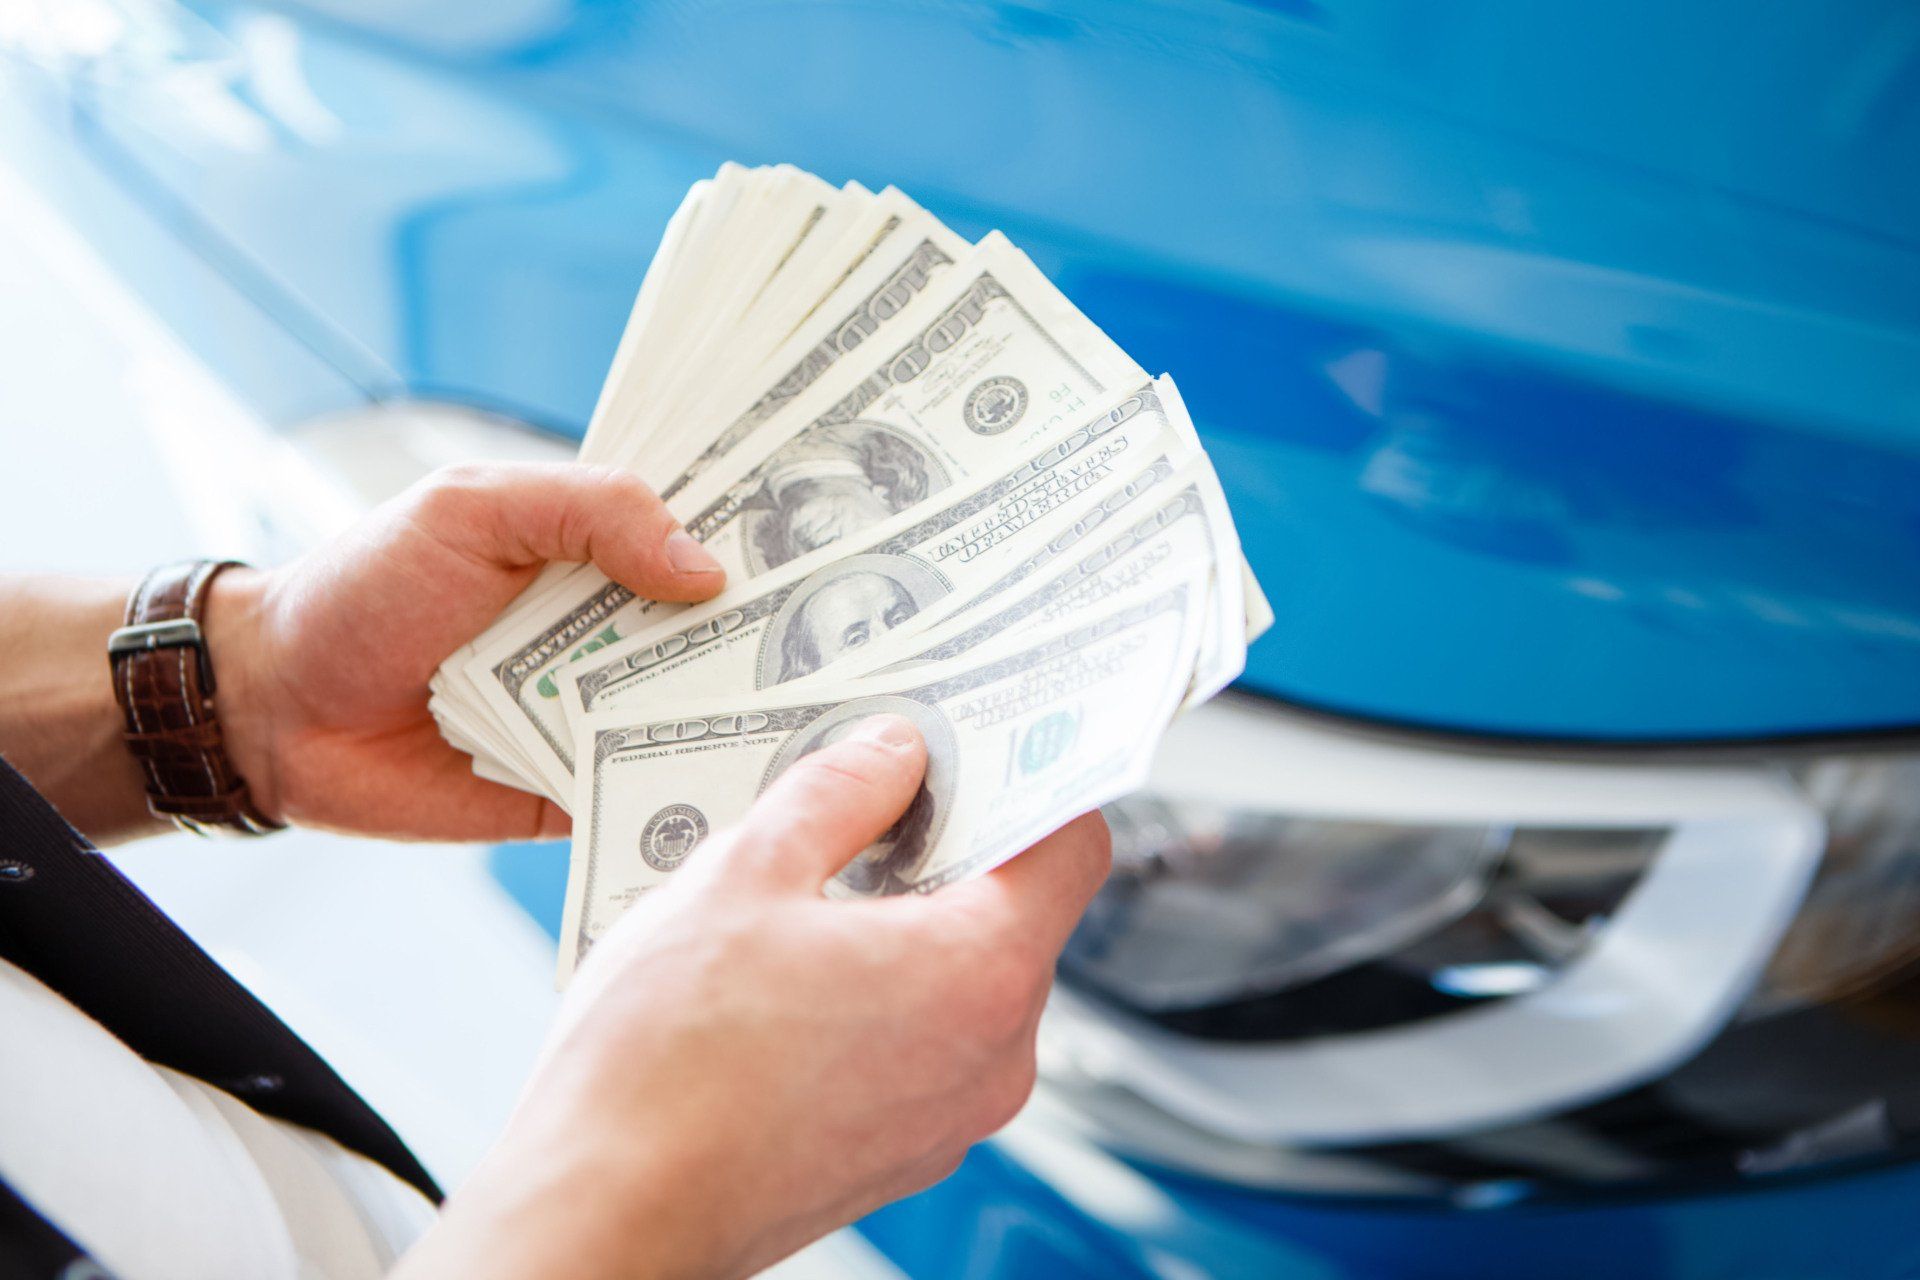 sell your car for cash fast